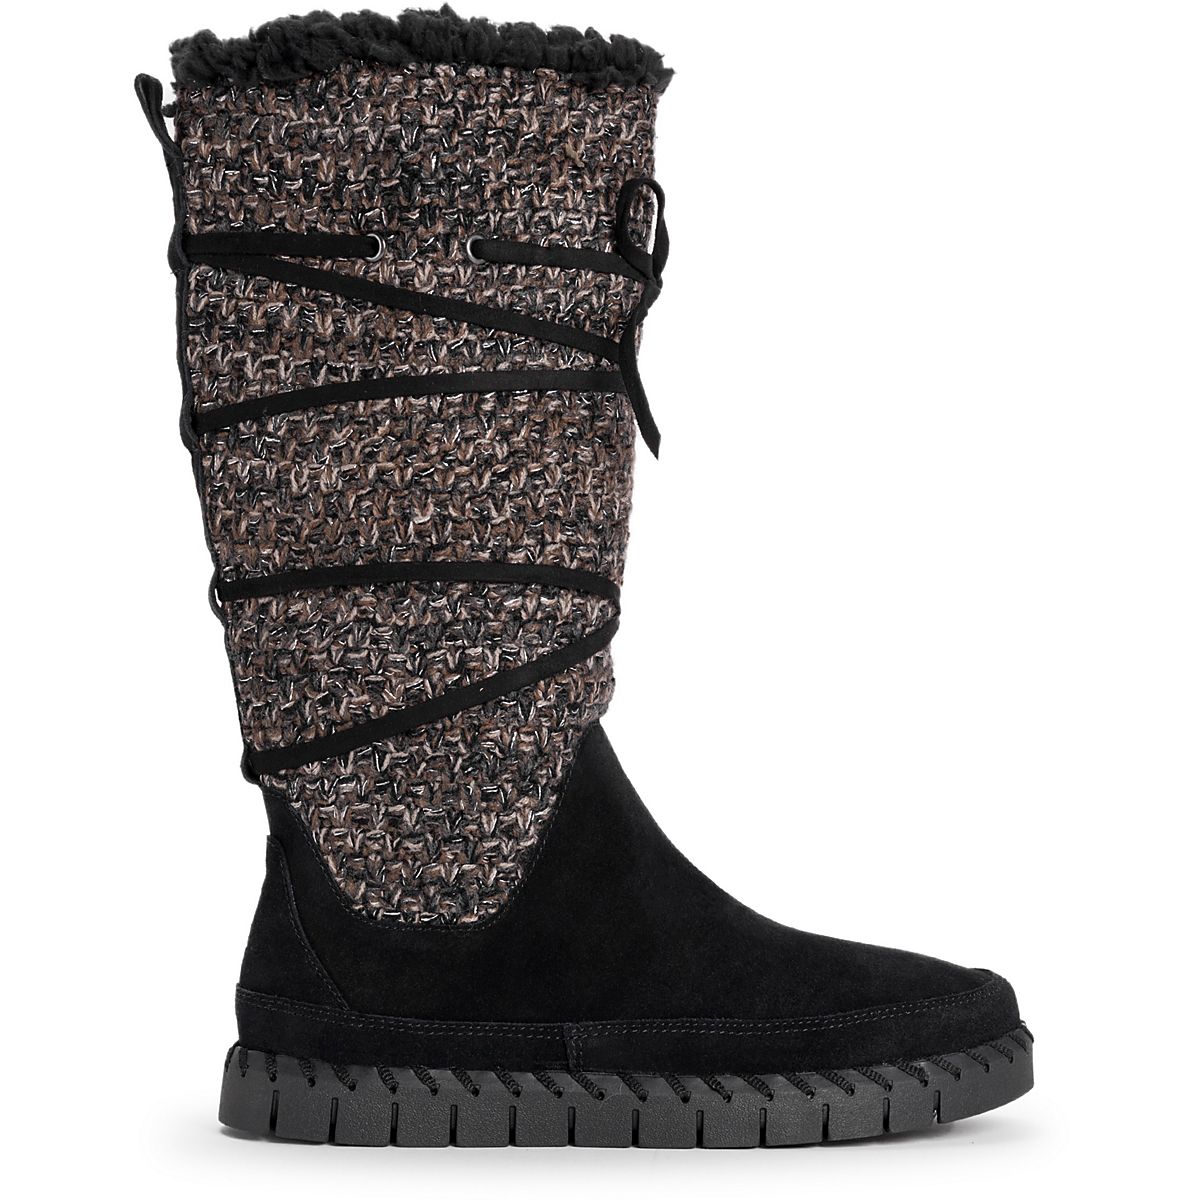 Muk Luks Women's Flexi New York Boots | Free Shipping at Academy